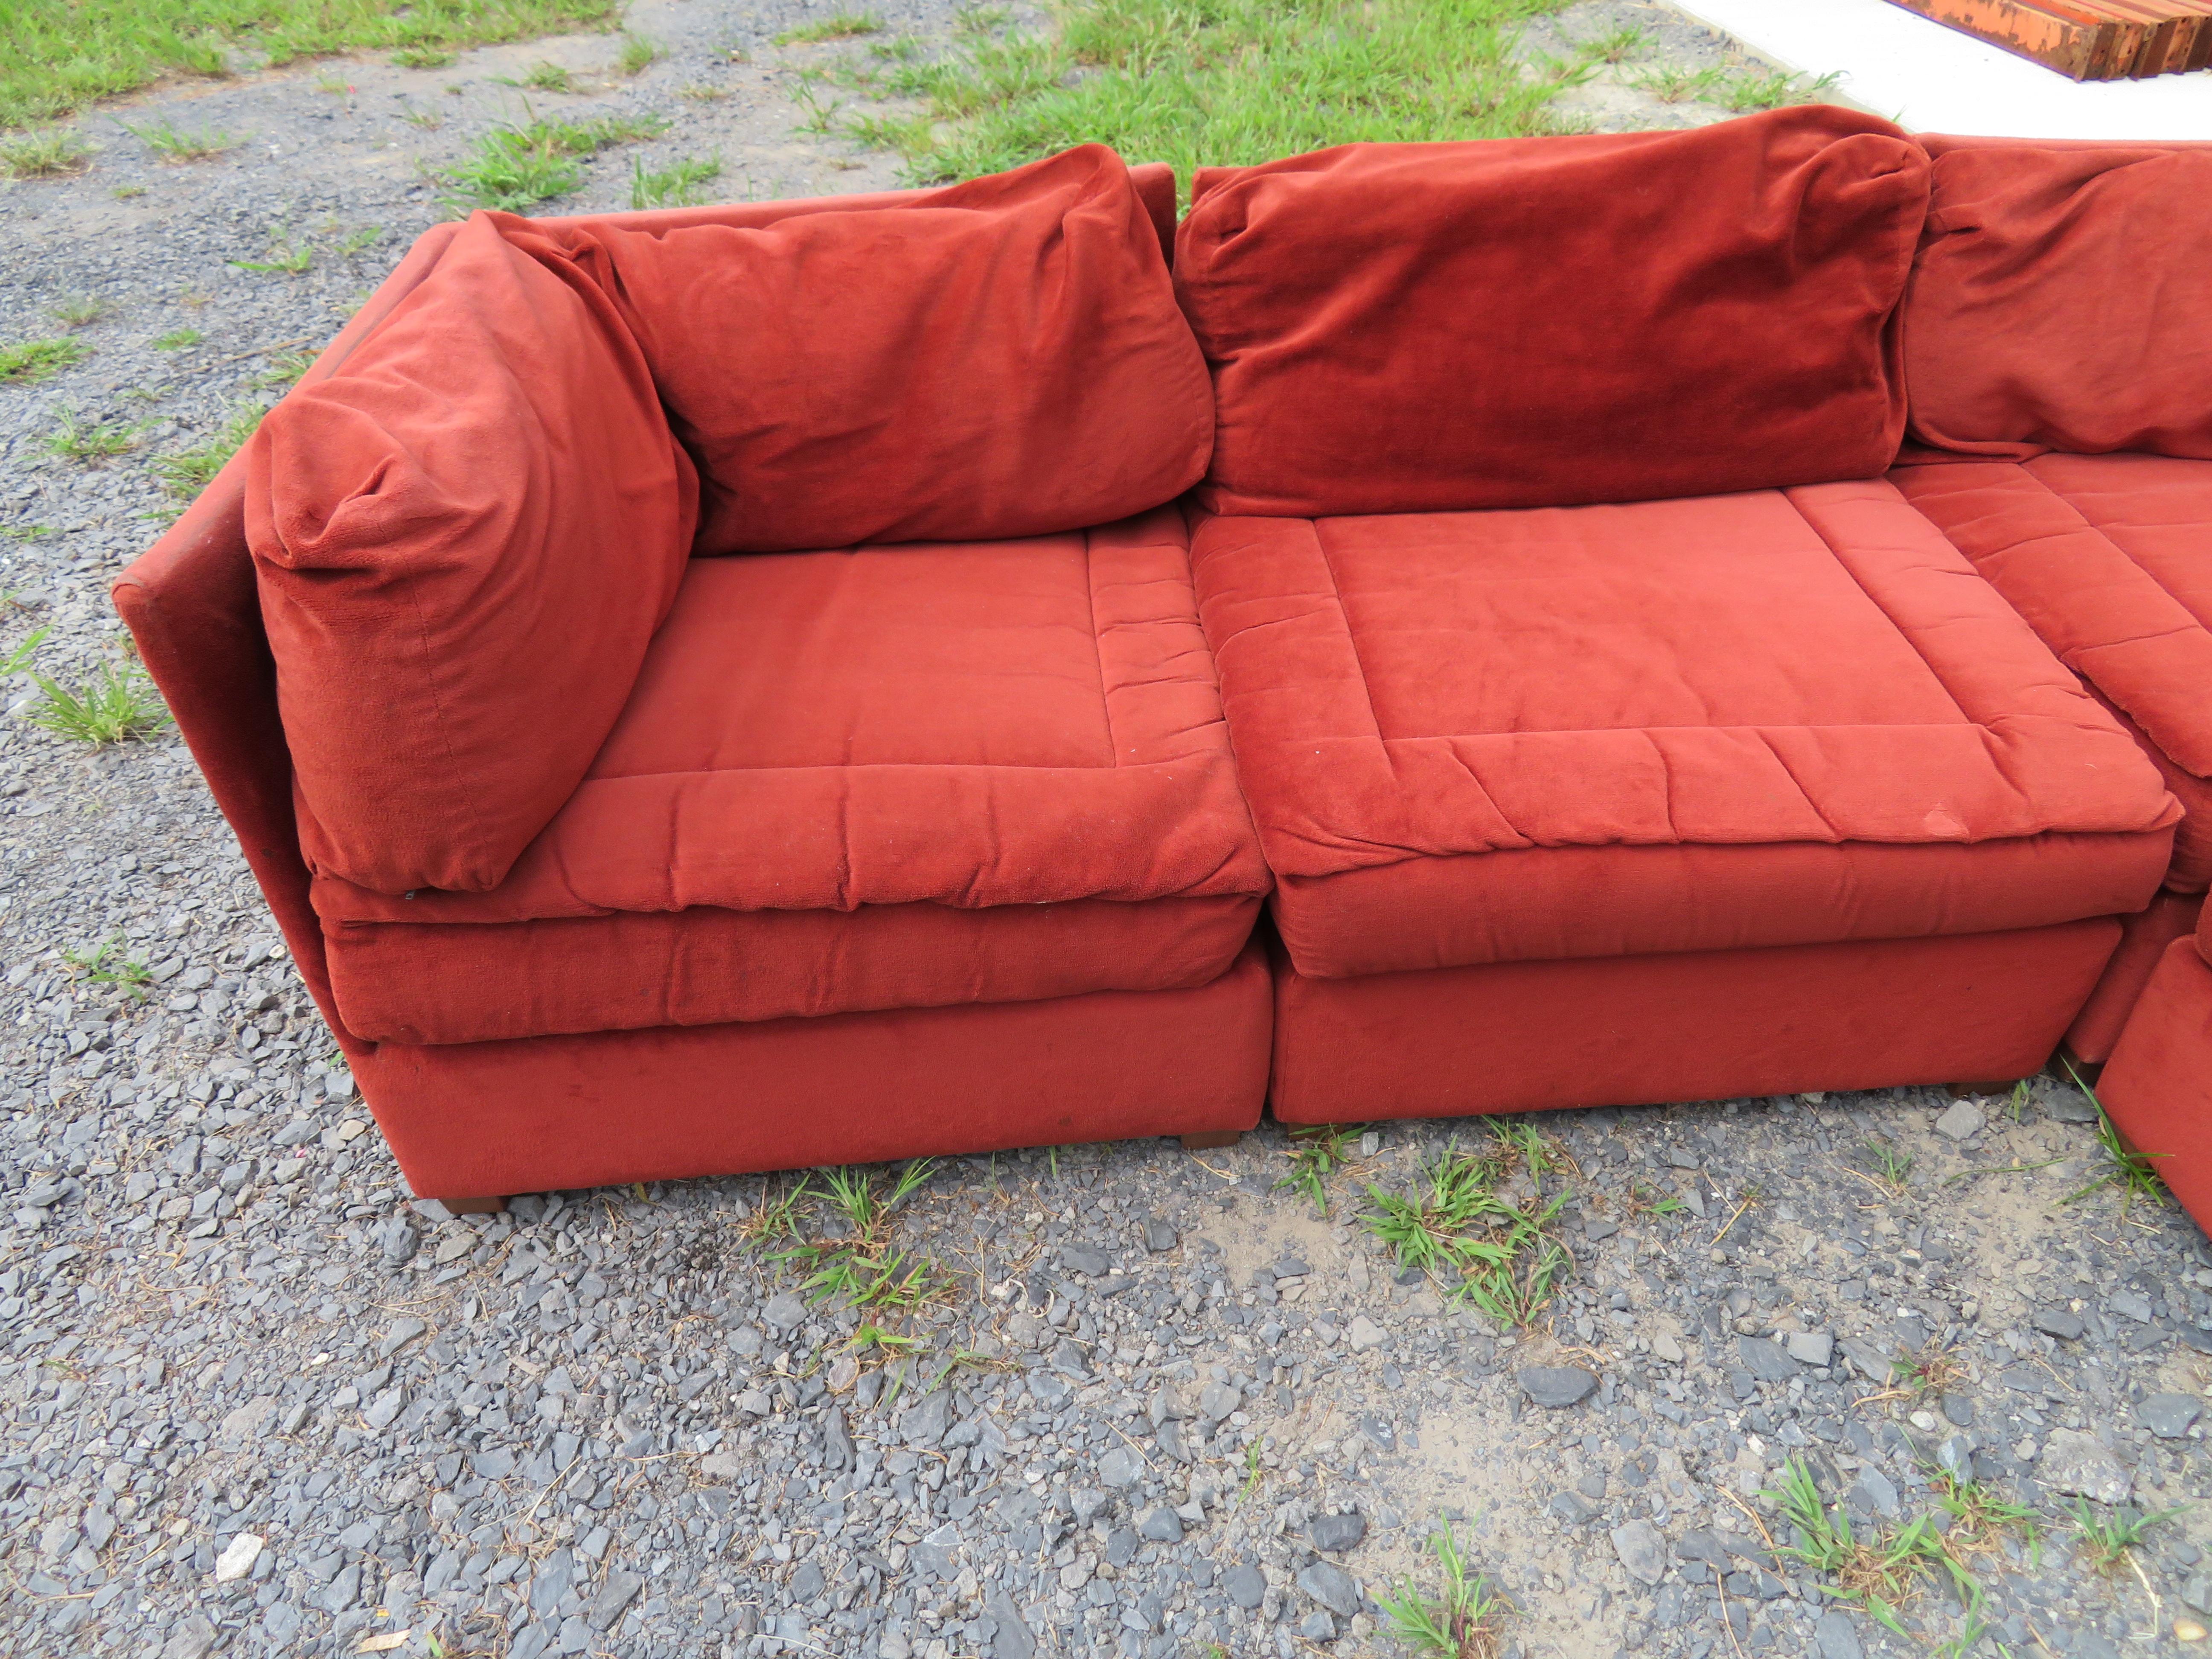 Handsome 7-Piece Milo Baughman Style Sectional Sofa Mid-Century Modern In Good Condition For Sale In Pemberton, NJ